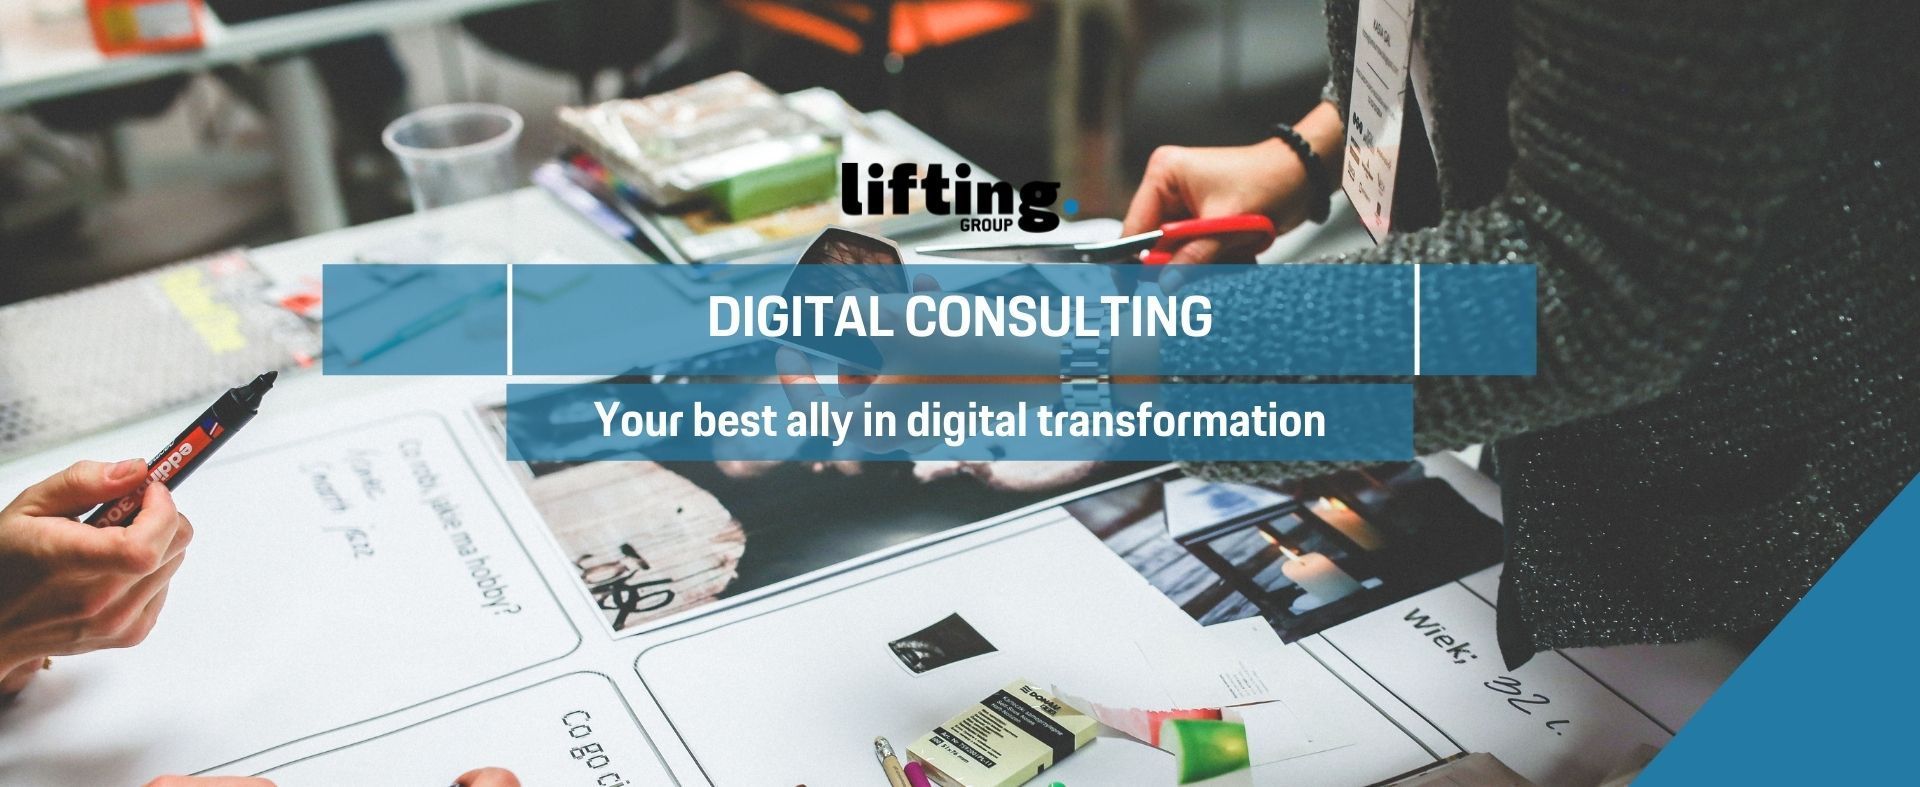 Digital consulting: Your best ally in digital transformation